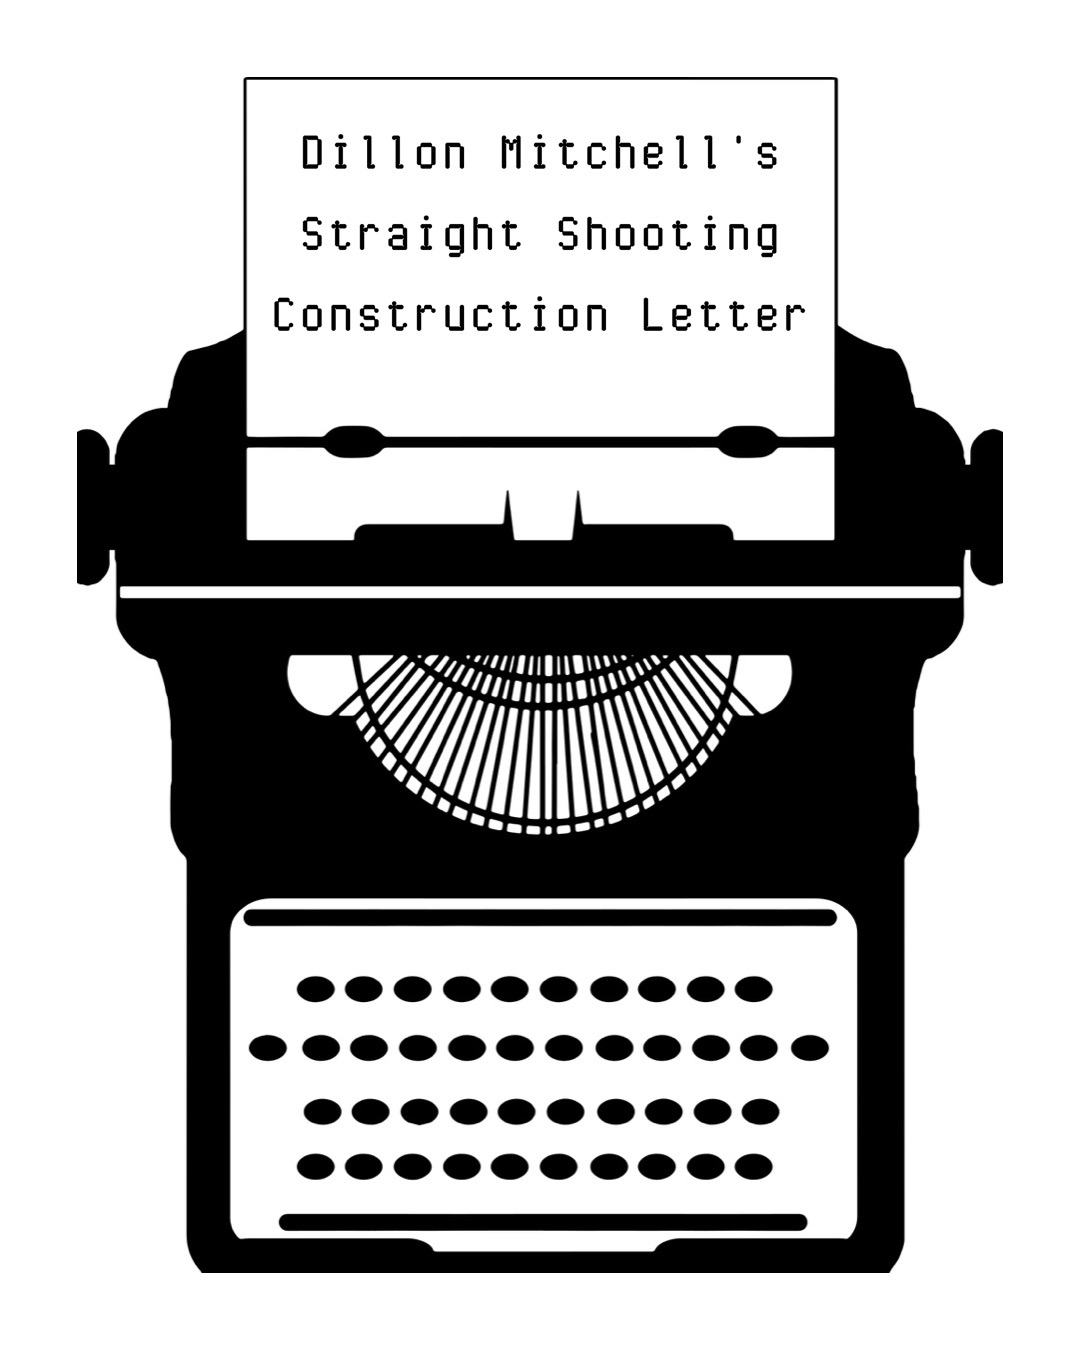 Dillon Mitchells Straight Shooting Construction Letter